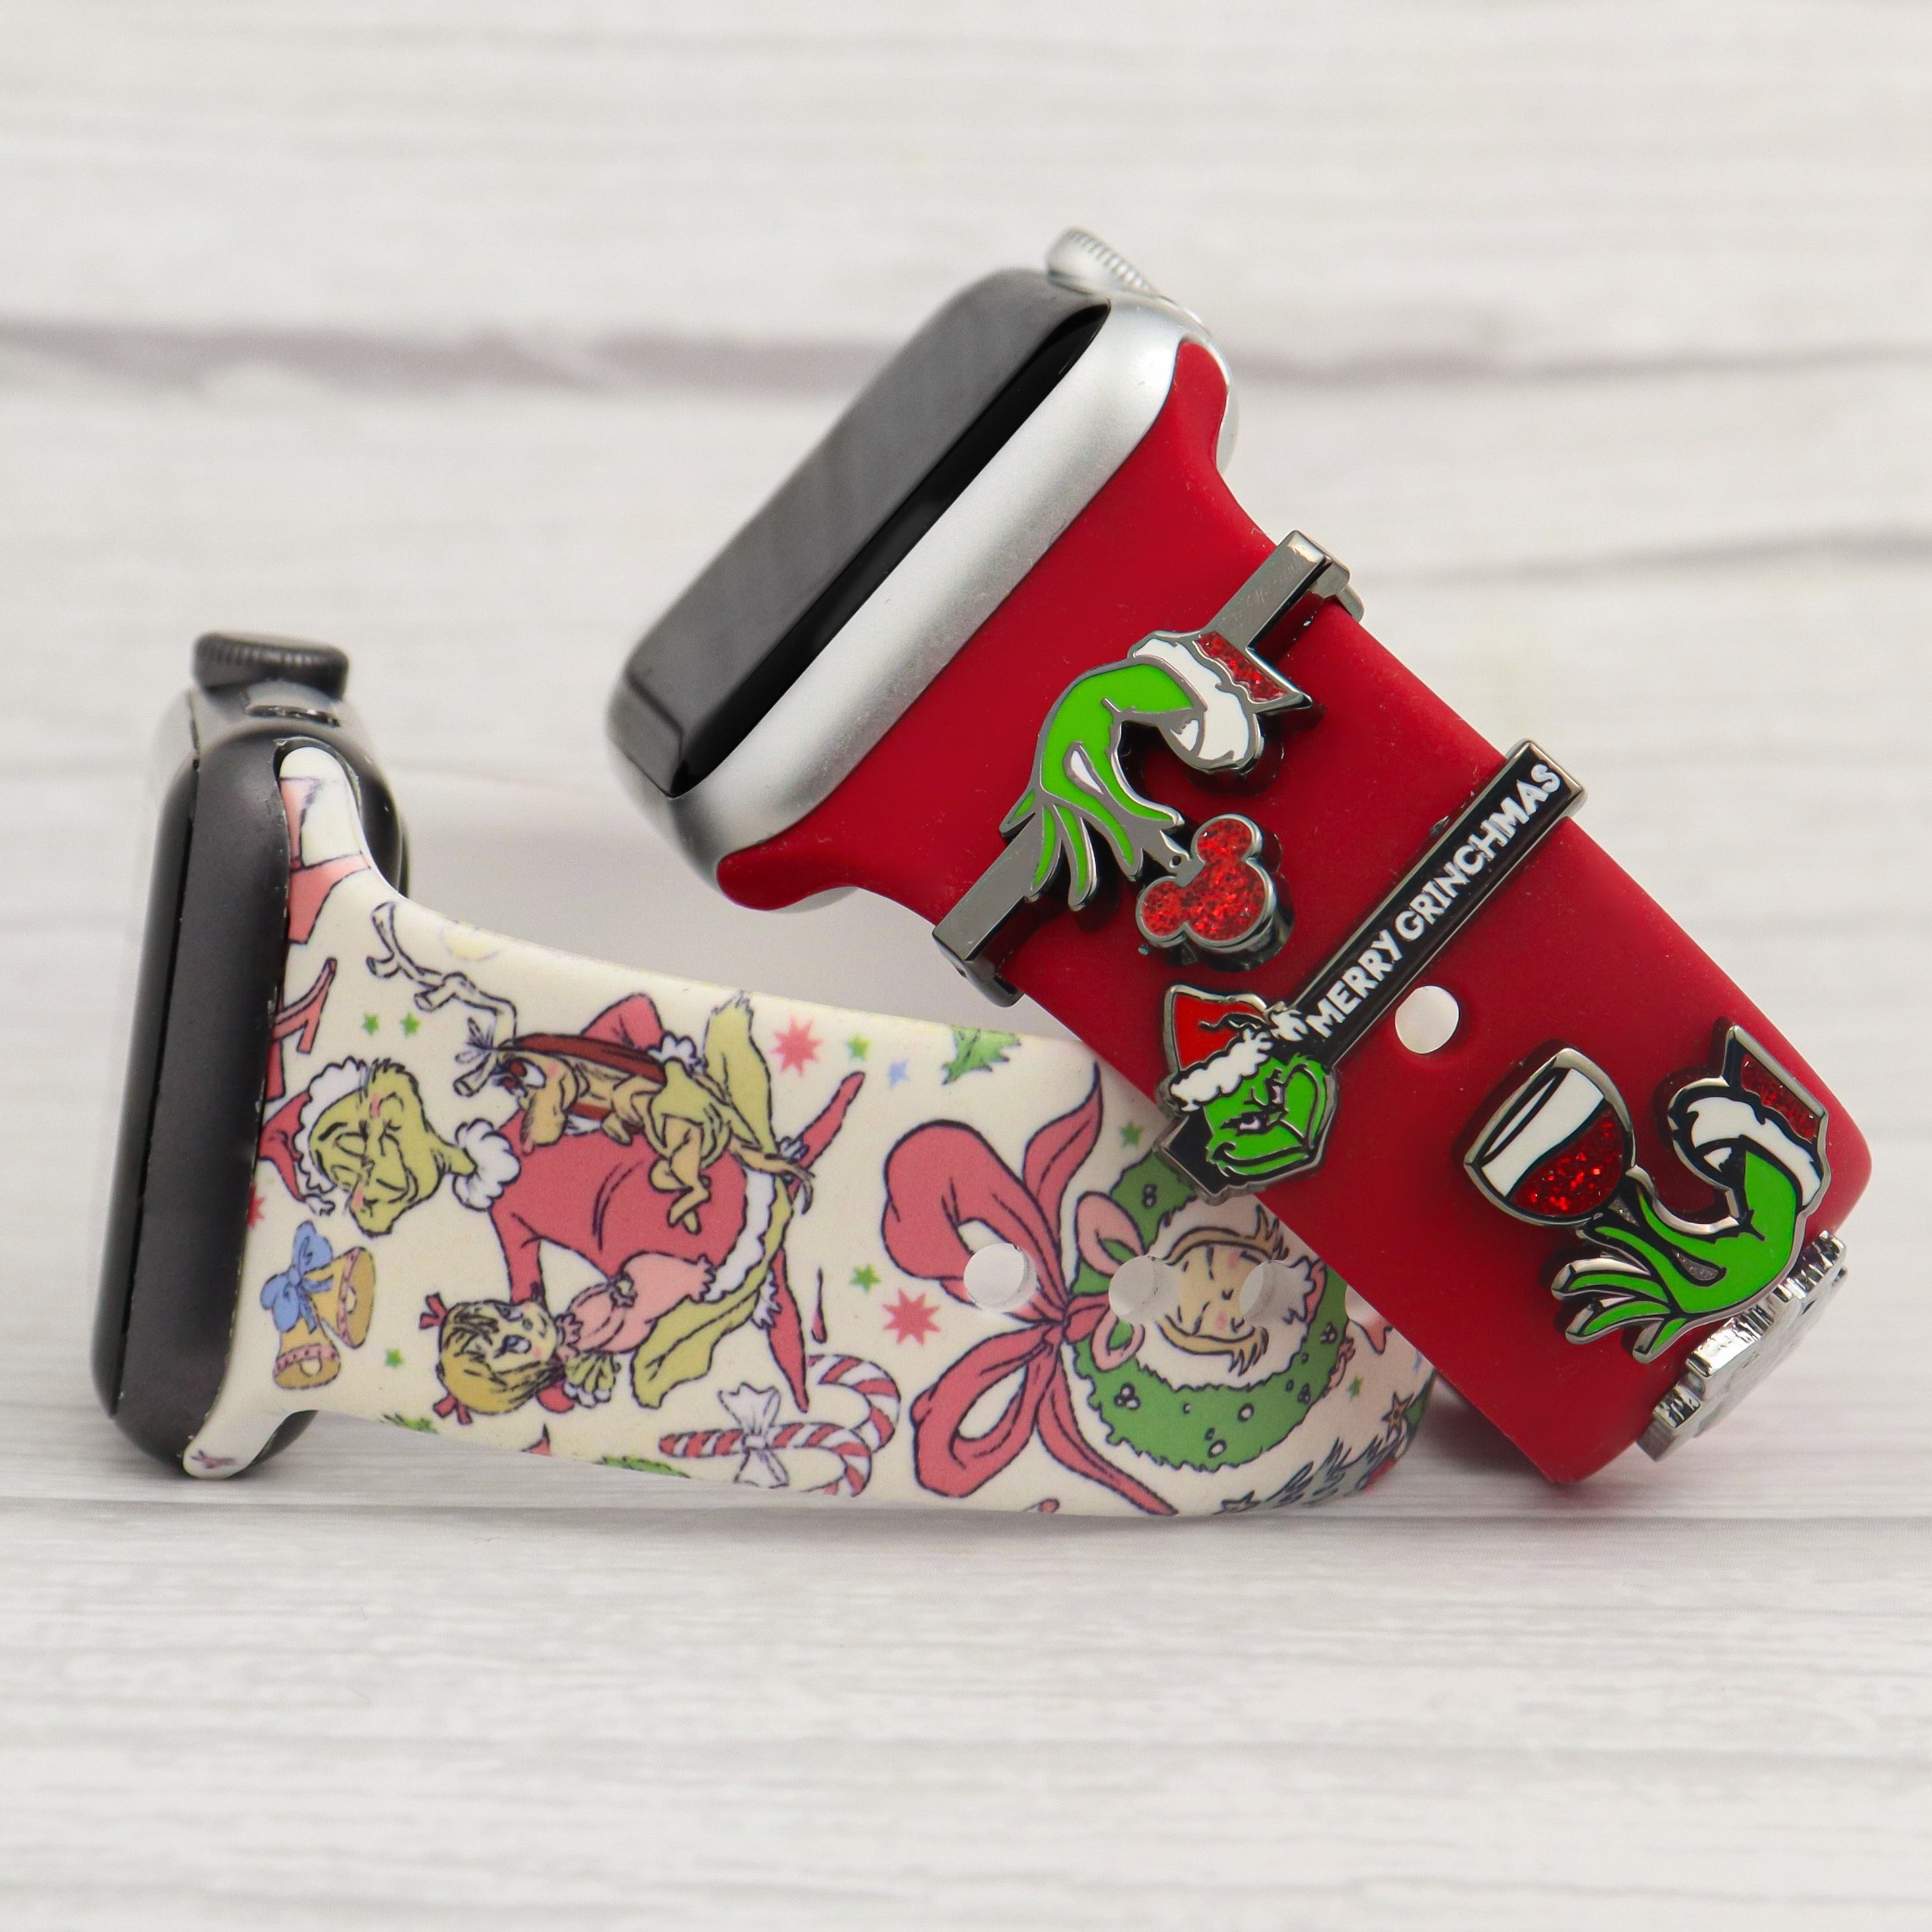 Watch Band ~ The Grinch